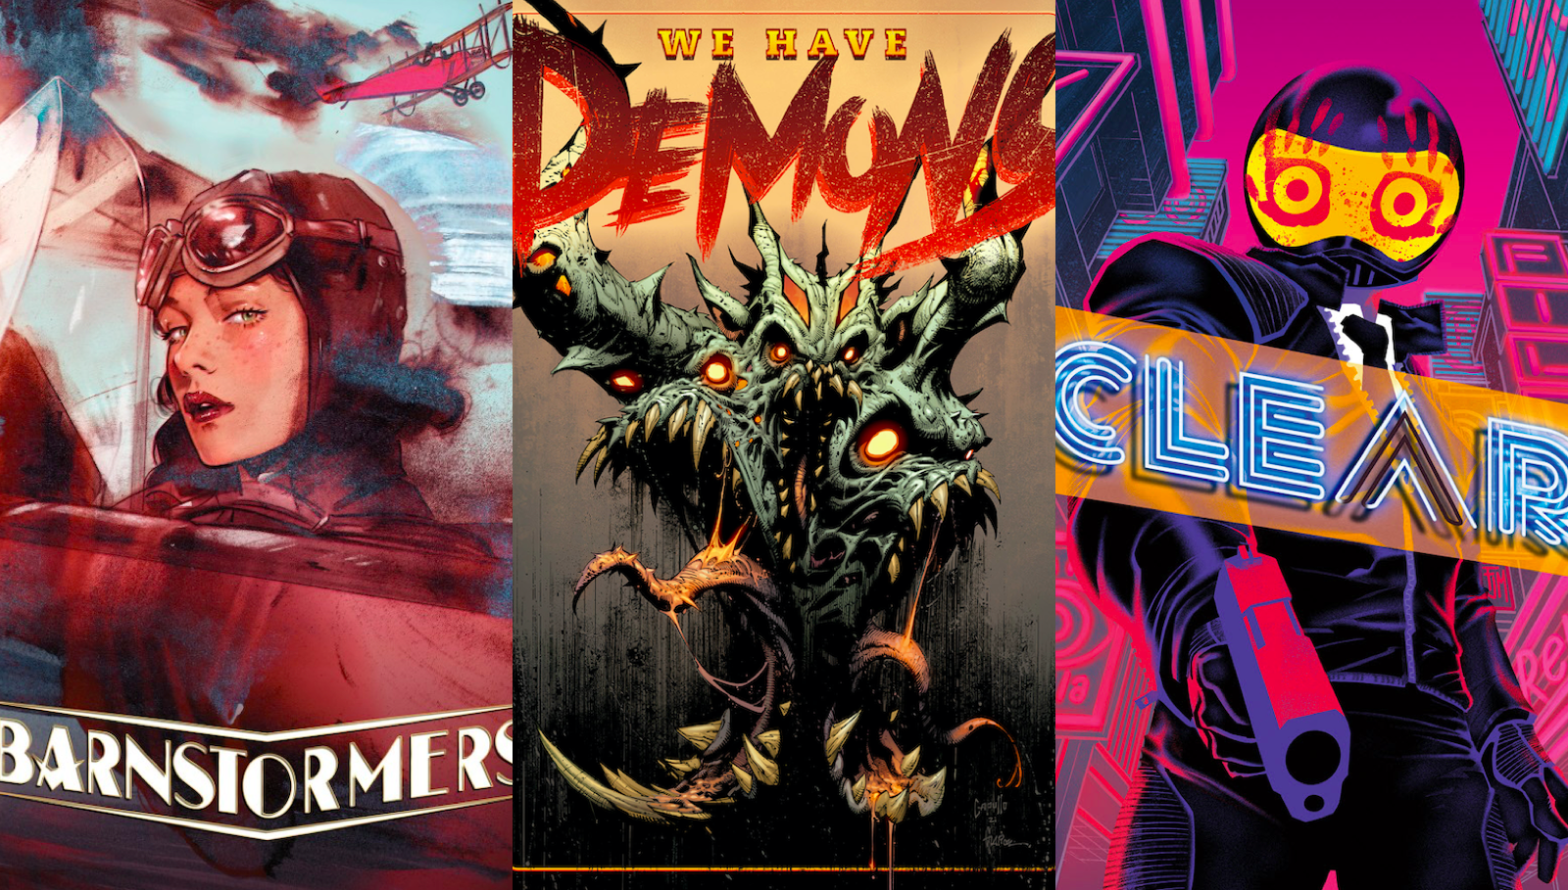 The covers of Barnstormers, We Have Demons, and Clear. (Image: Tula Lotay, Dee Cunniffe, and Francis Manapul/ComiXology)